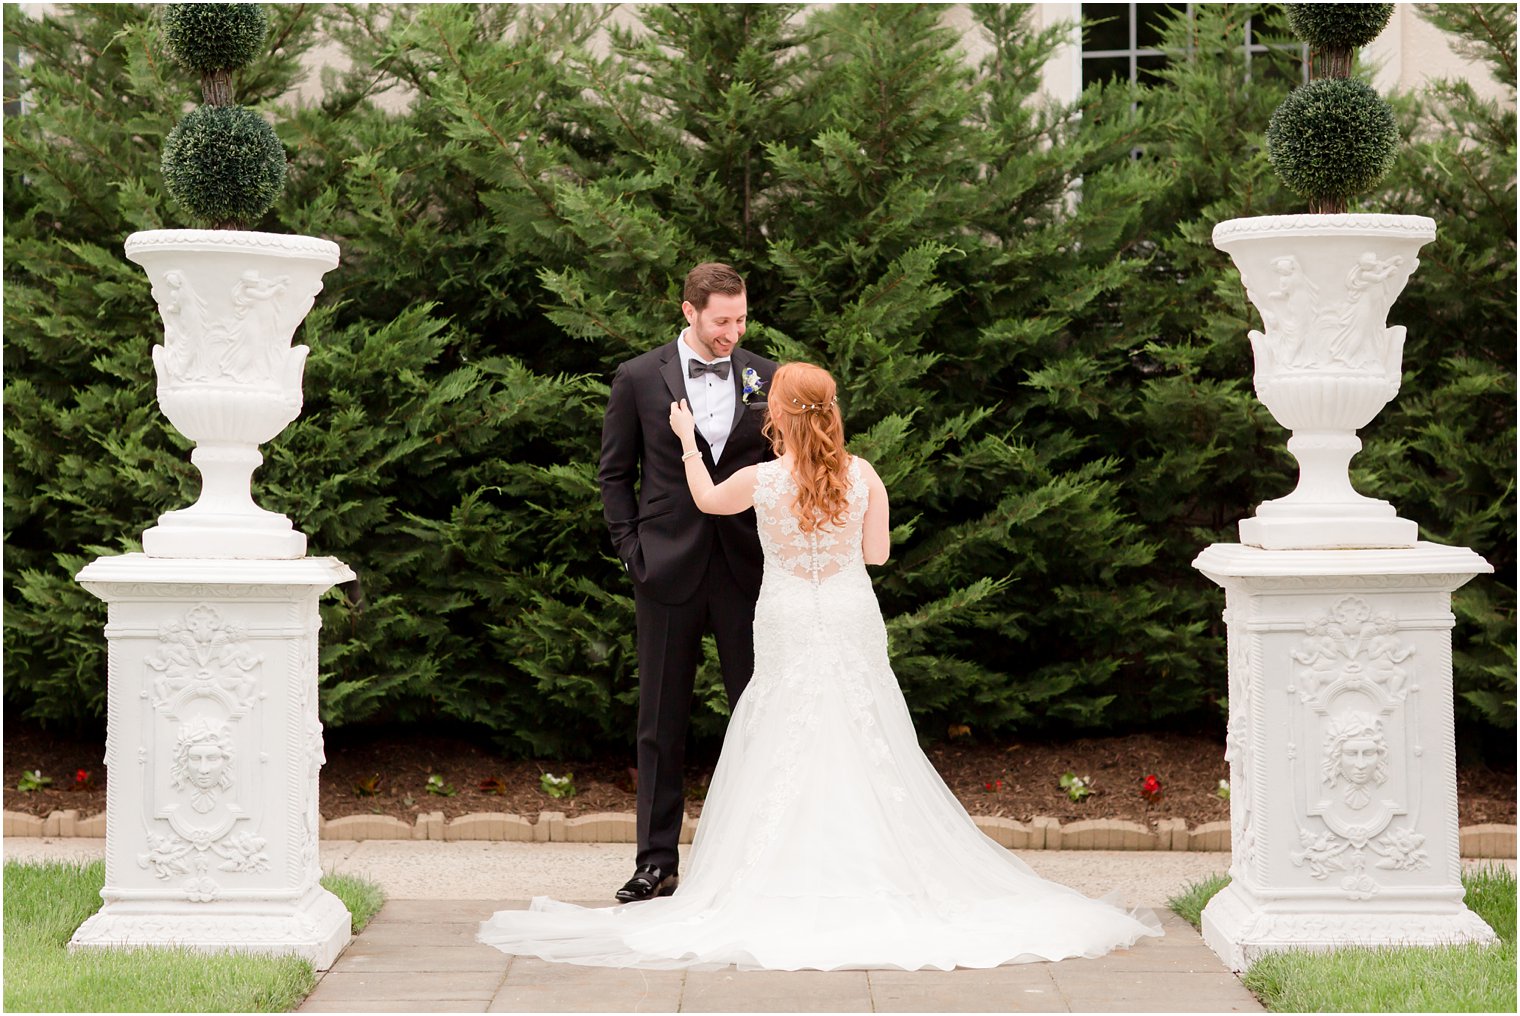 Classic and timeless wedding Photos at Wilshire Grand | Photos by Idalia Photography